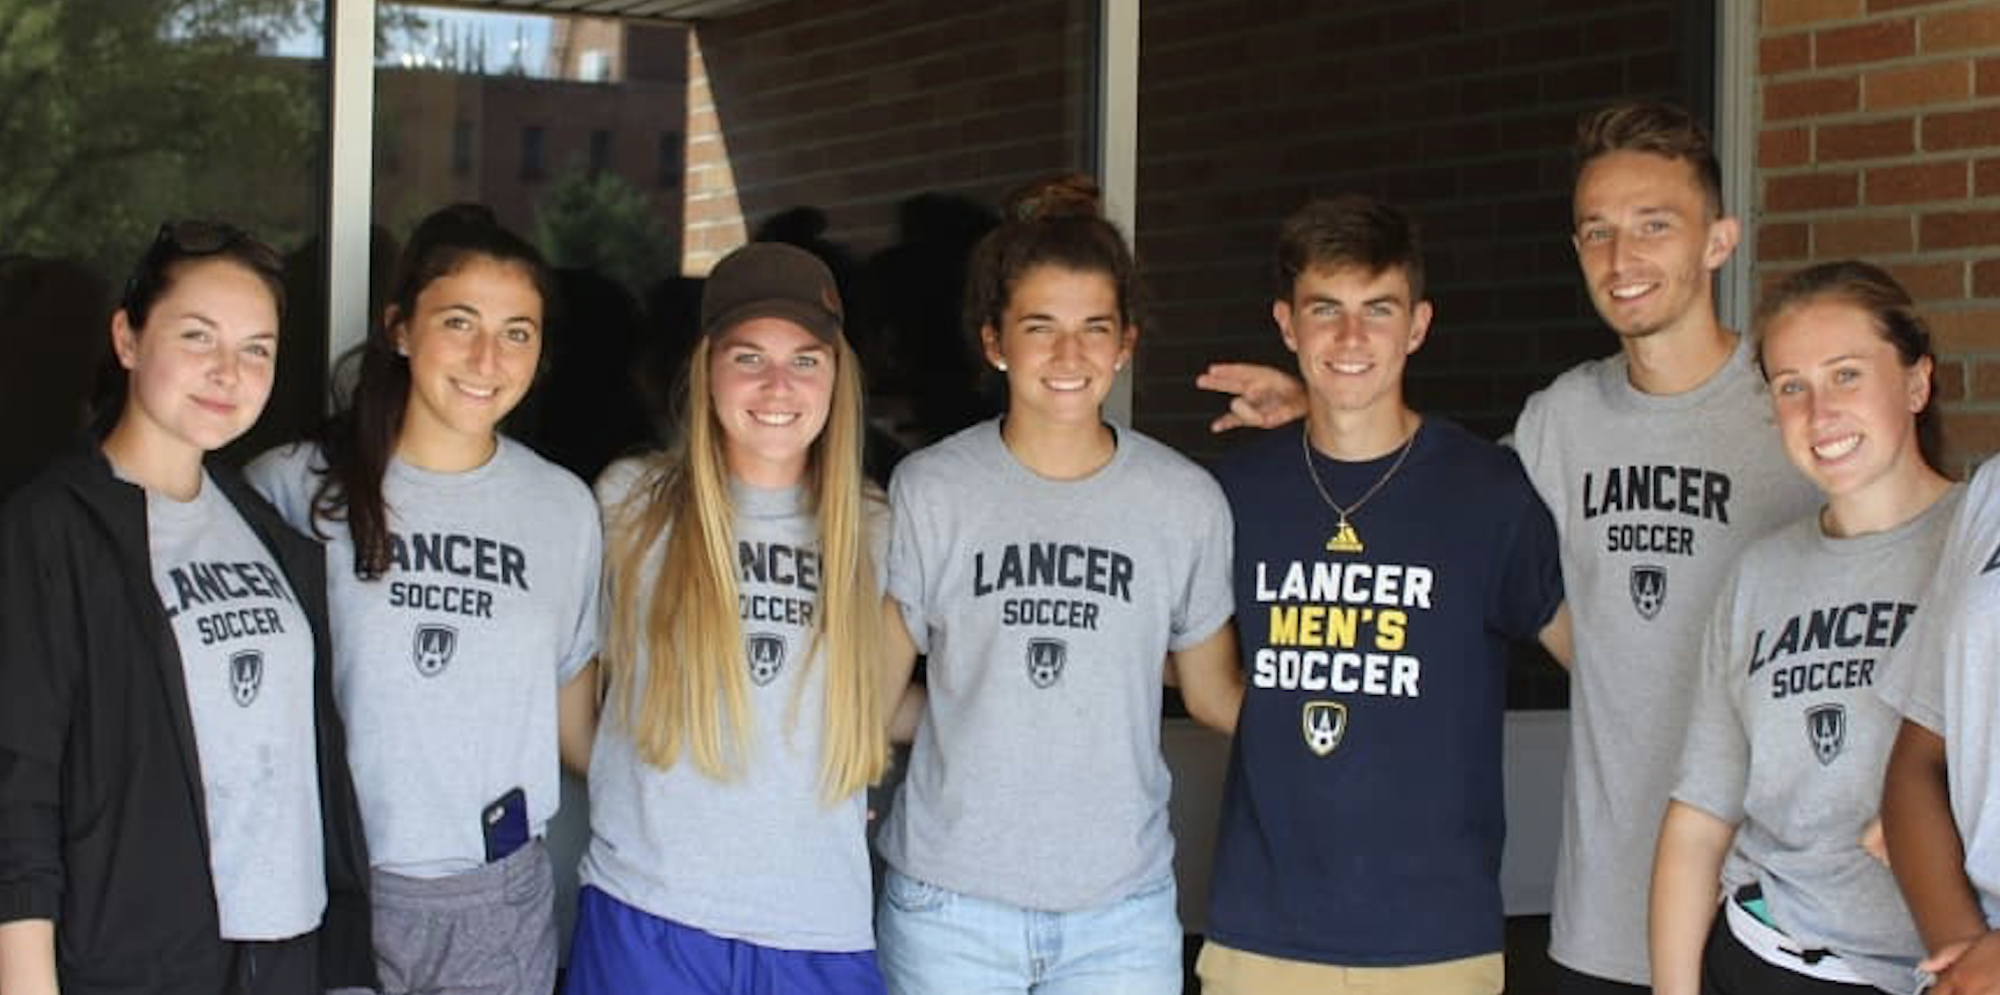 Lancer soccer helping out at Res move in day